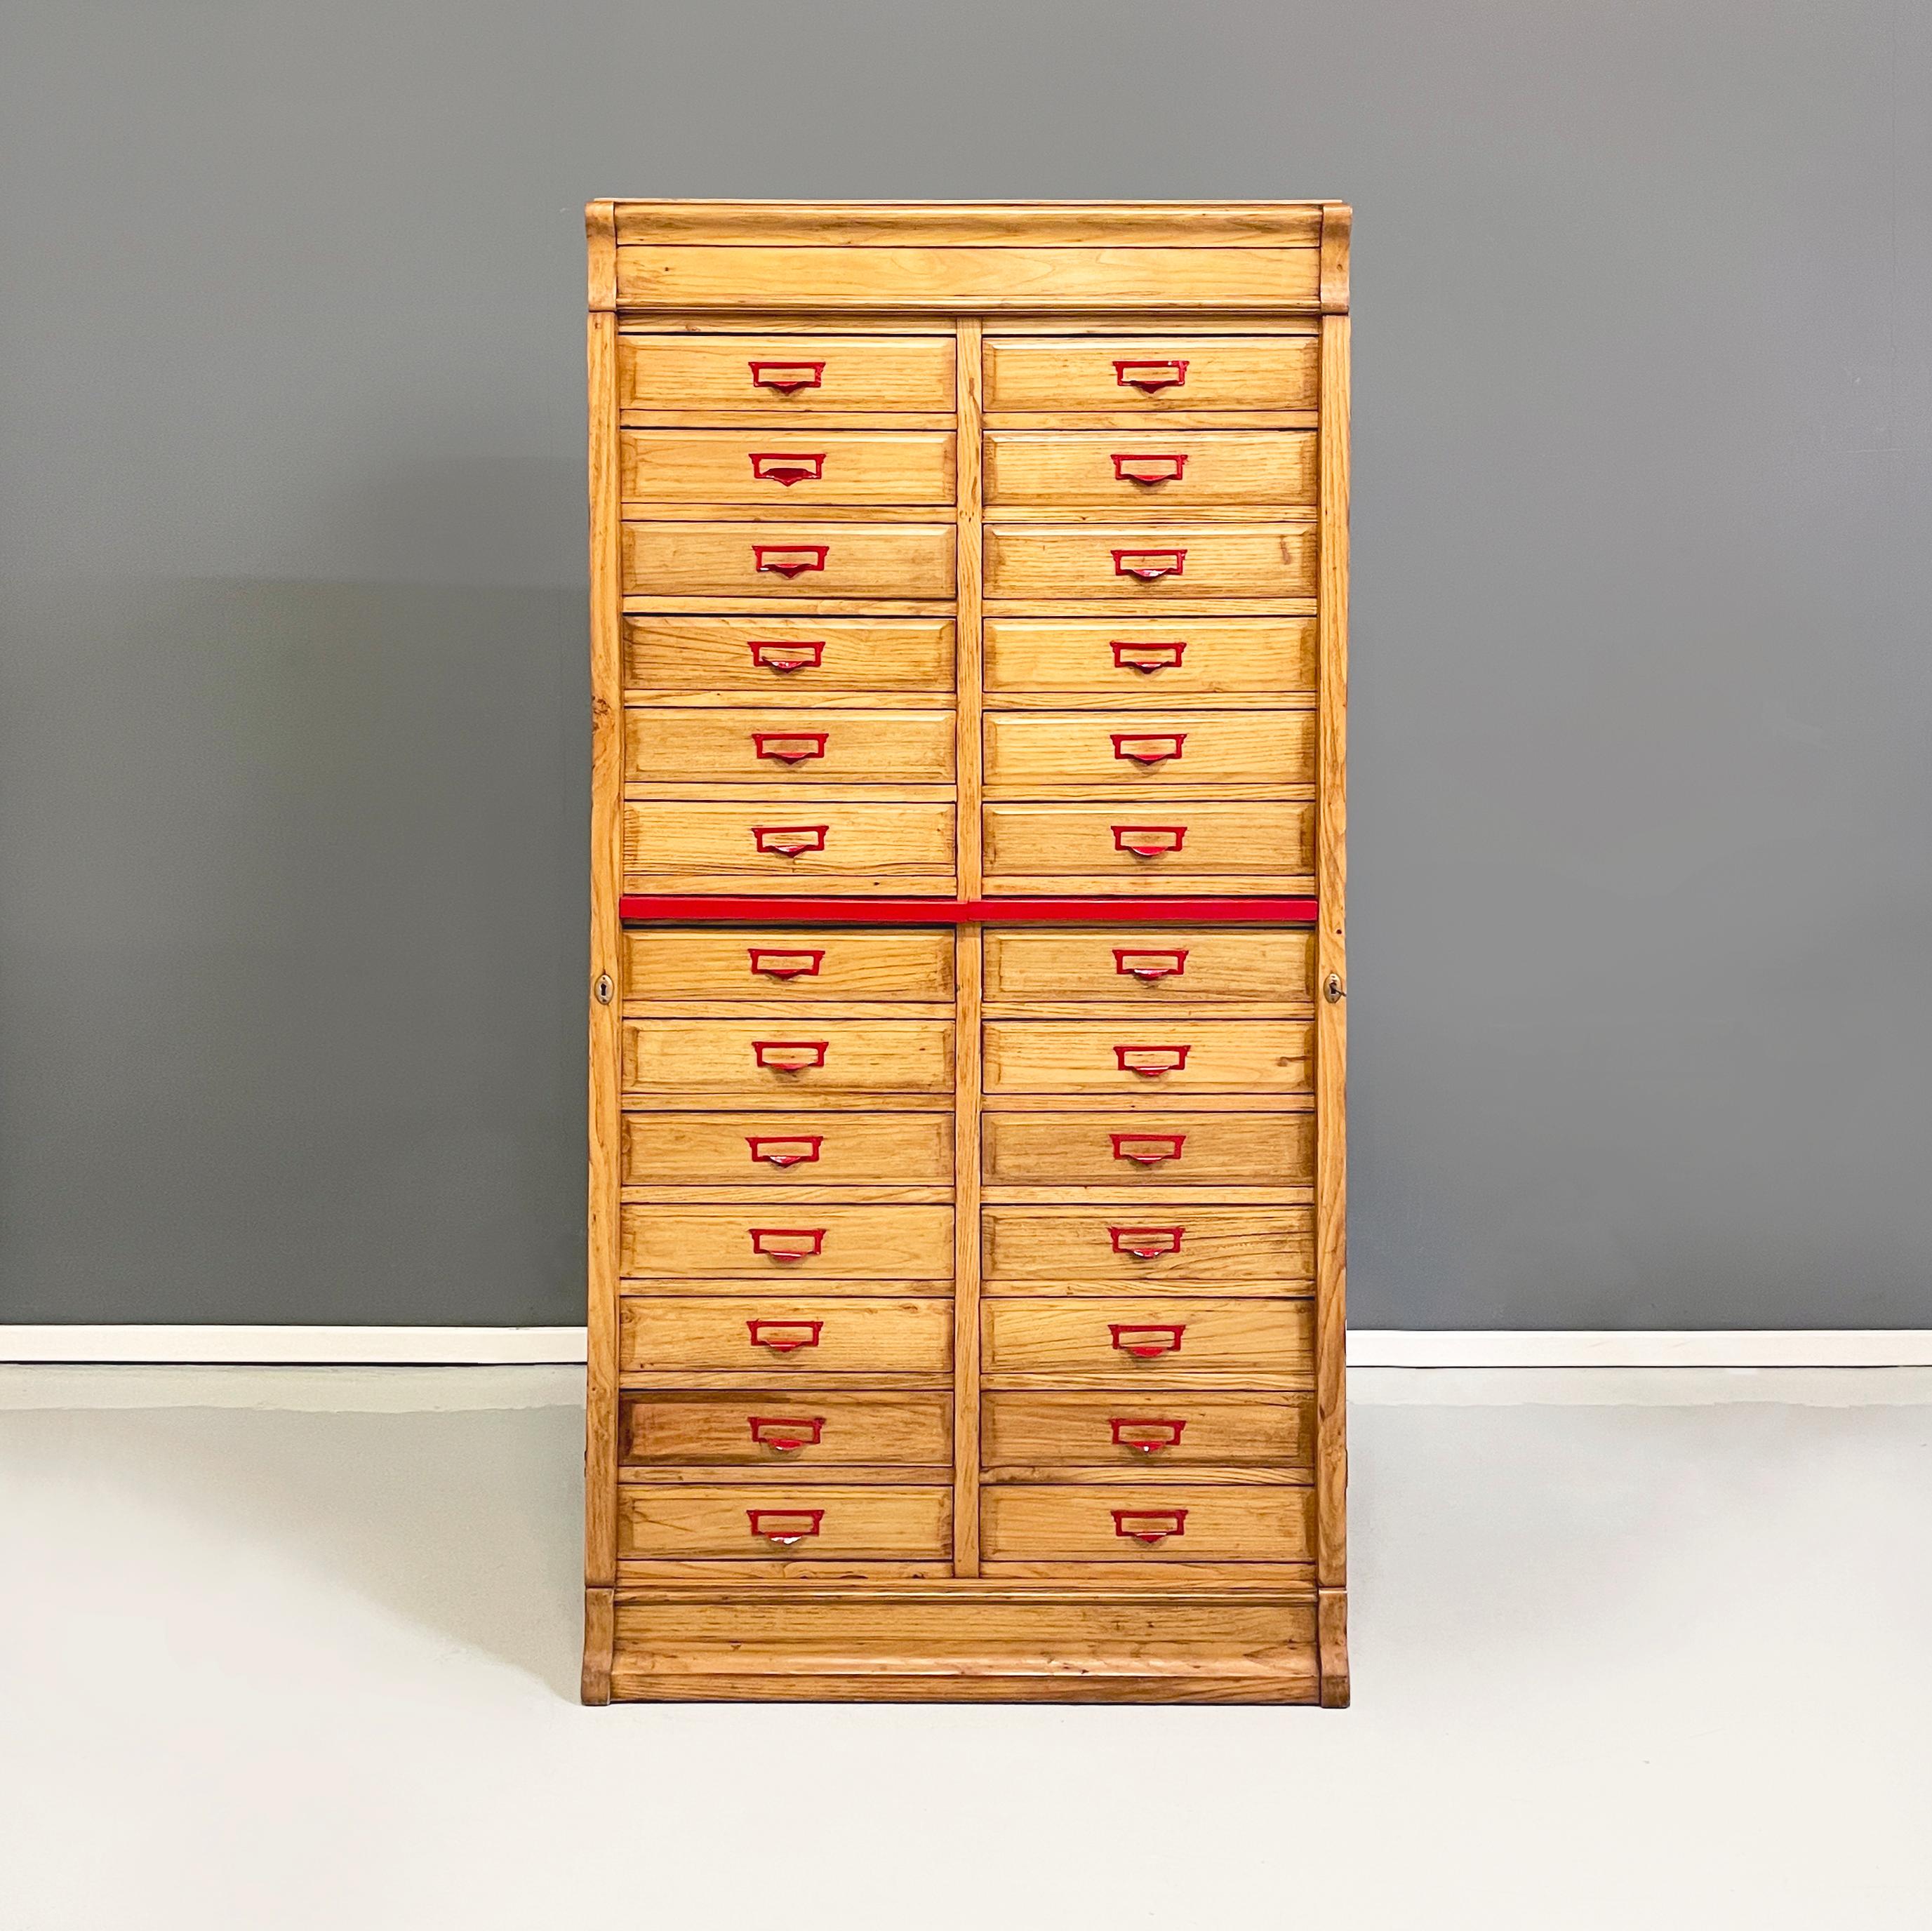 Italian mid-century modern office filing cabinet in wood and red metal, 1940s
Office filing cabinet in solid wood with red painted metal strip in the middle. On the front it has 26 rectangular drawers divided on two columns. Each drawer features a